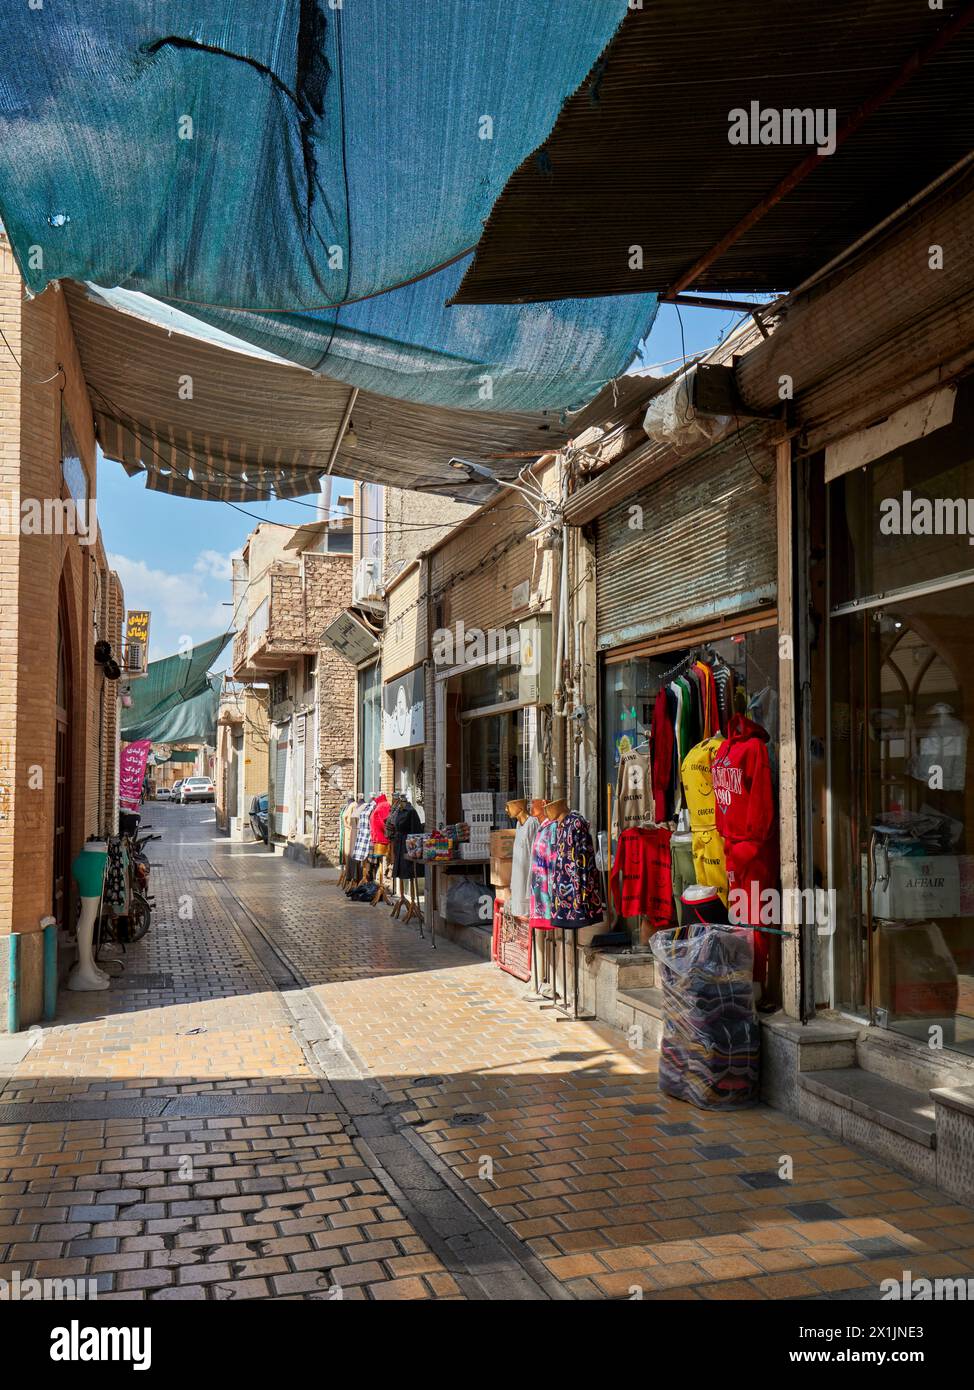 A narrow cobbled street with sun shade canopy lined with small shops in the historic center of Isfahan, Iran. Stock Photo